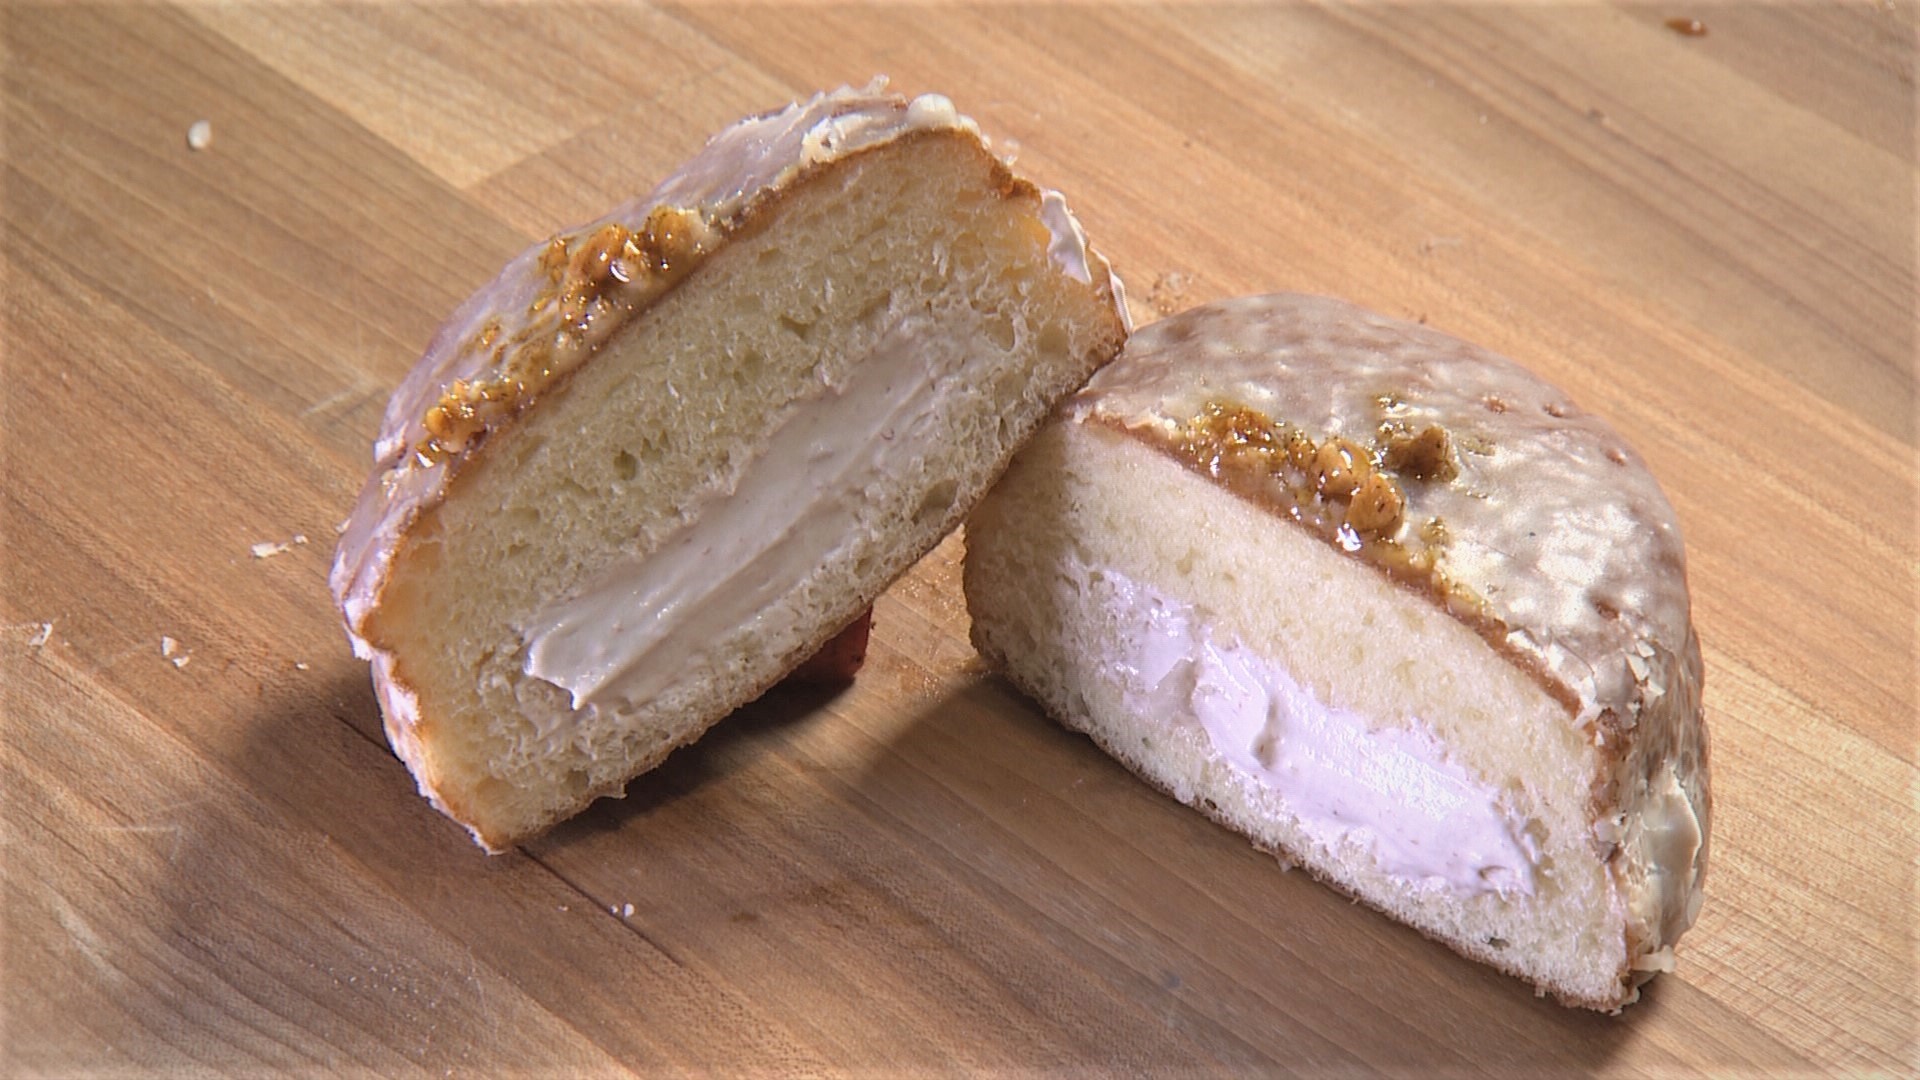 Half and Half Doughnuts creates the handcrafted treats from scratch on Capitol Hill